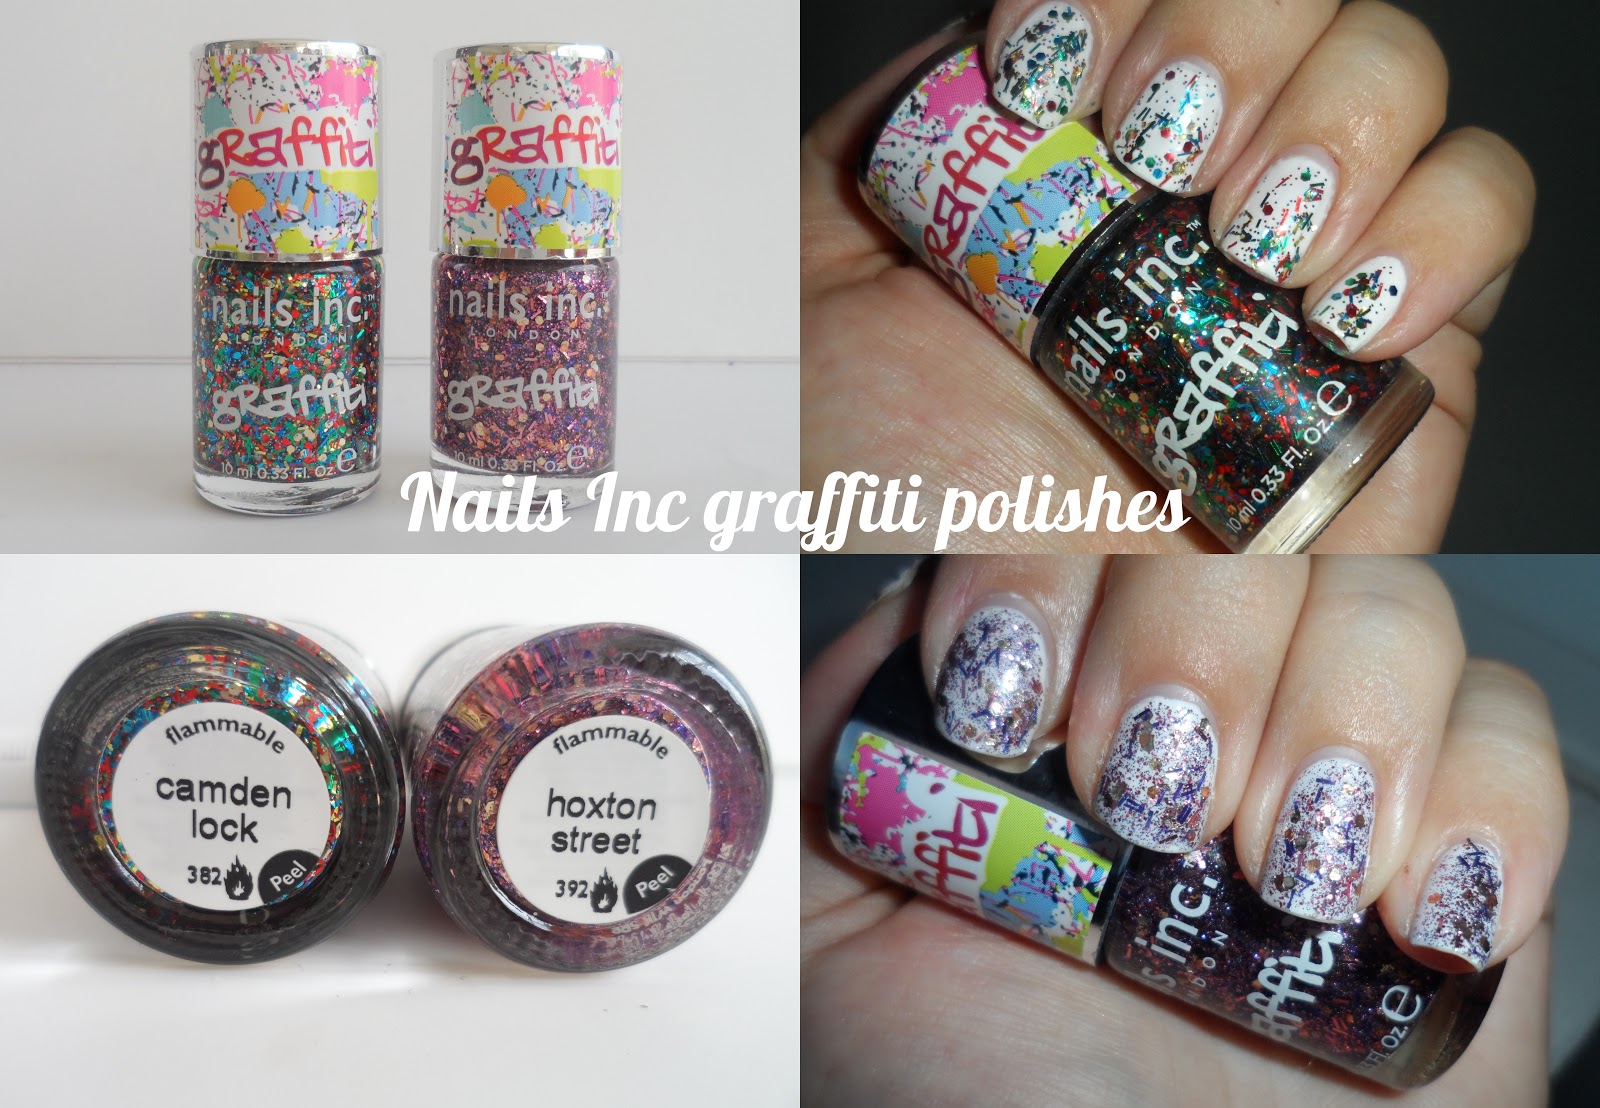 Nails Inc Graffiti Effect Glitter Nail Polishes In Camden Lock And Hoxton Street Review And Swatches Flutter And Sparkle